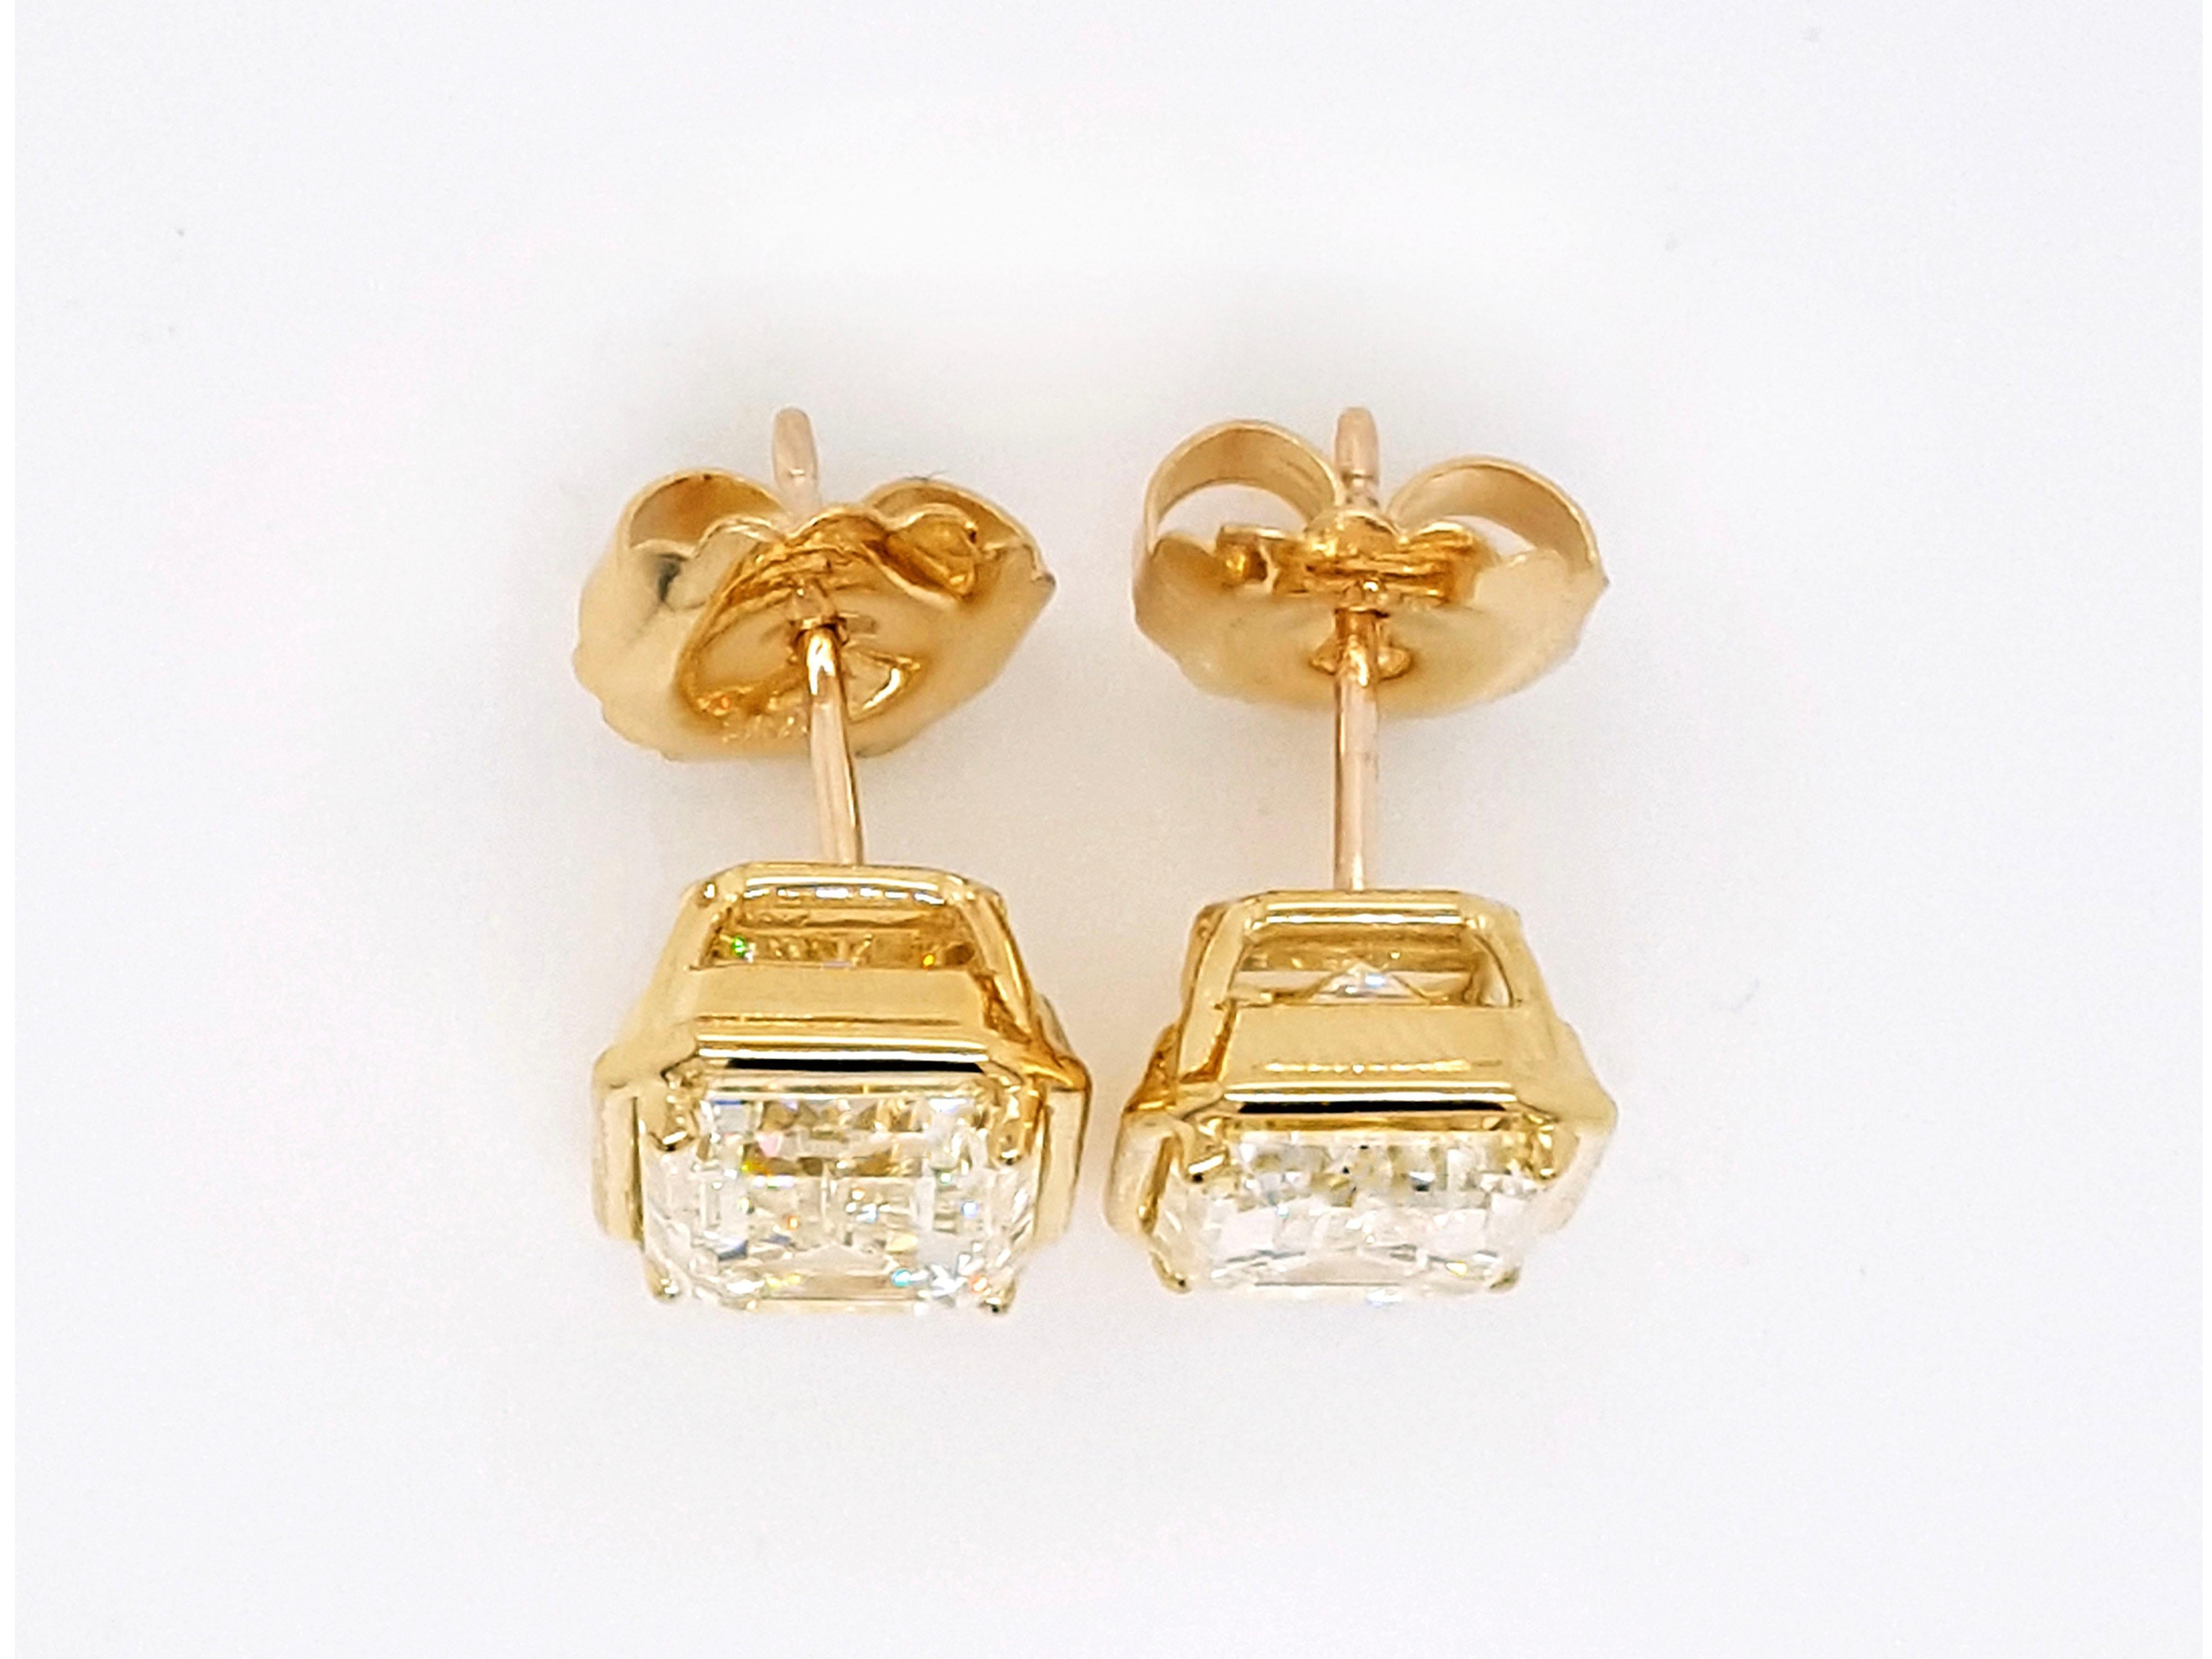 Novel Collection showcasing a stunning pair of bezel-set 10 Carat Emerald Cut Diamond Stud Earrings Set in  18k Gold Bezel, GIA certified, Excellent Polish and Symmetry.
Set with a perfect match of emerald cut 5.01 carat, VVS2 clarity, S-T color GIA